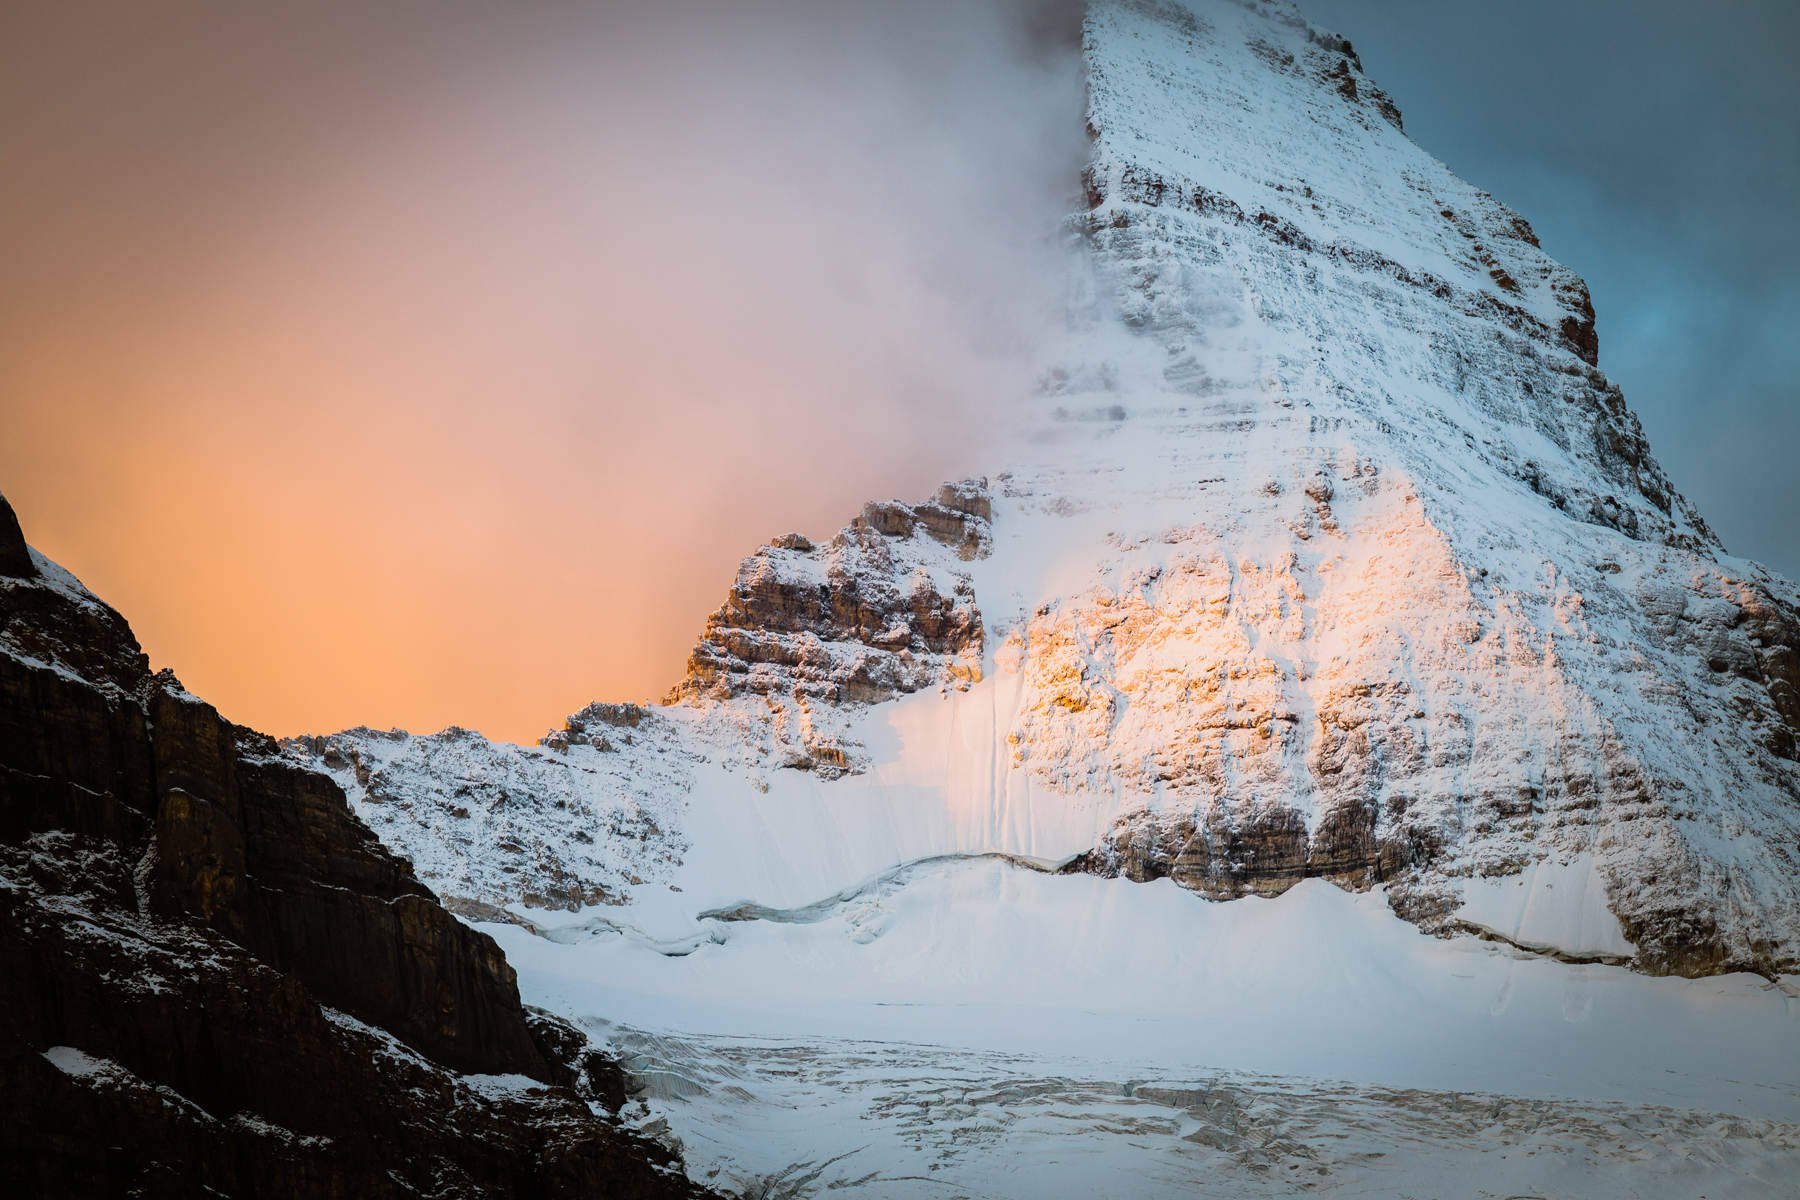 Mount Assiniboine Elopement Photographers at a Backcountry Lodge - Photo 48